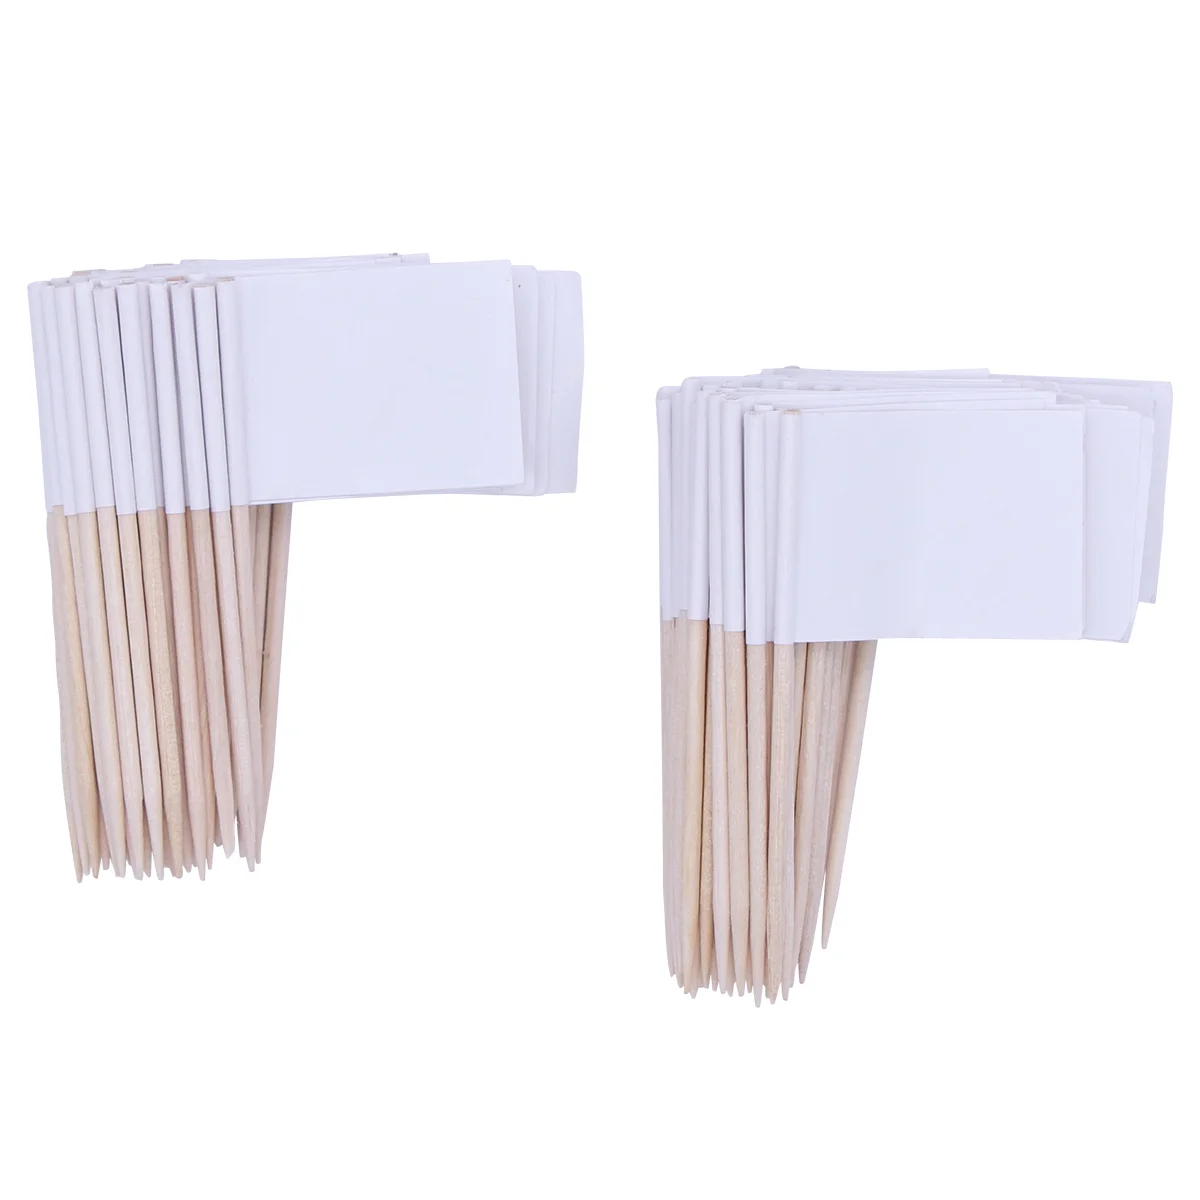 

Flag Picks Flags Cupcake Blank Toothpicks White Sticktoothpick Topper Country Picksmall Toppersappetizer Wood Sticks Fruit Party